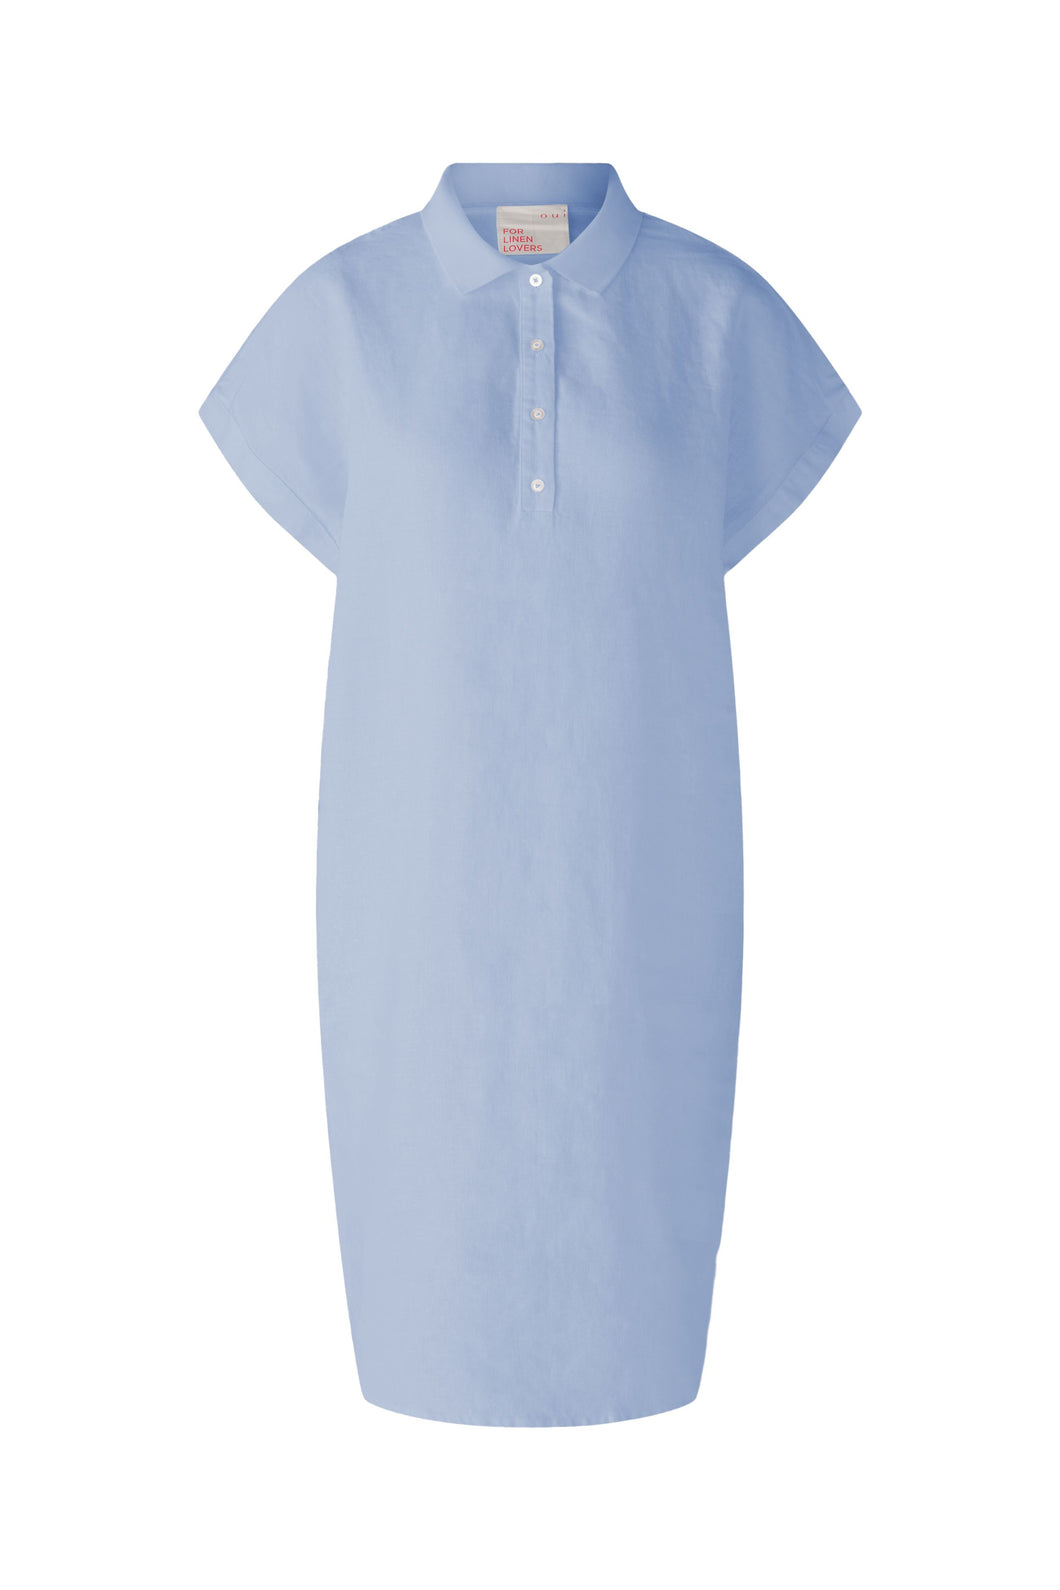 Oui - Linen Dress with Jersey Patch in Pale Blue